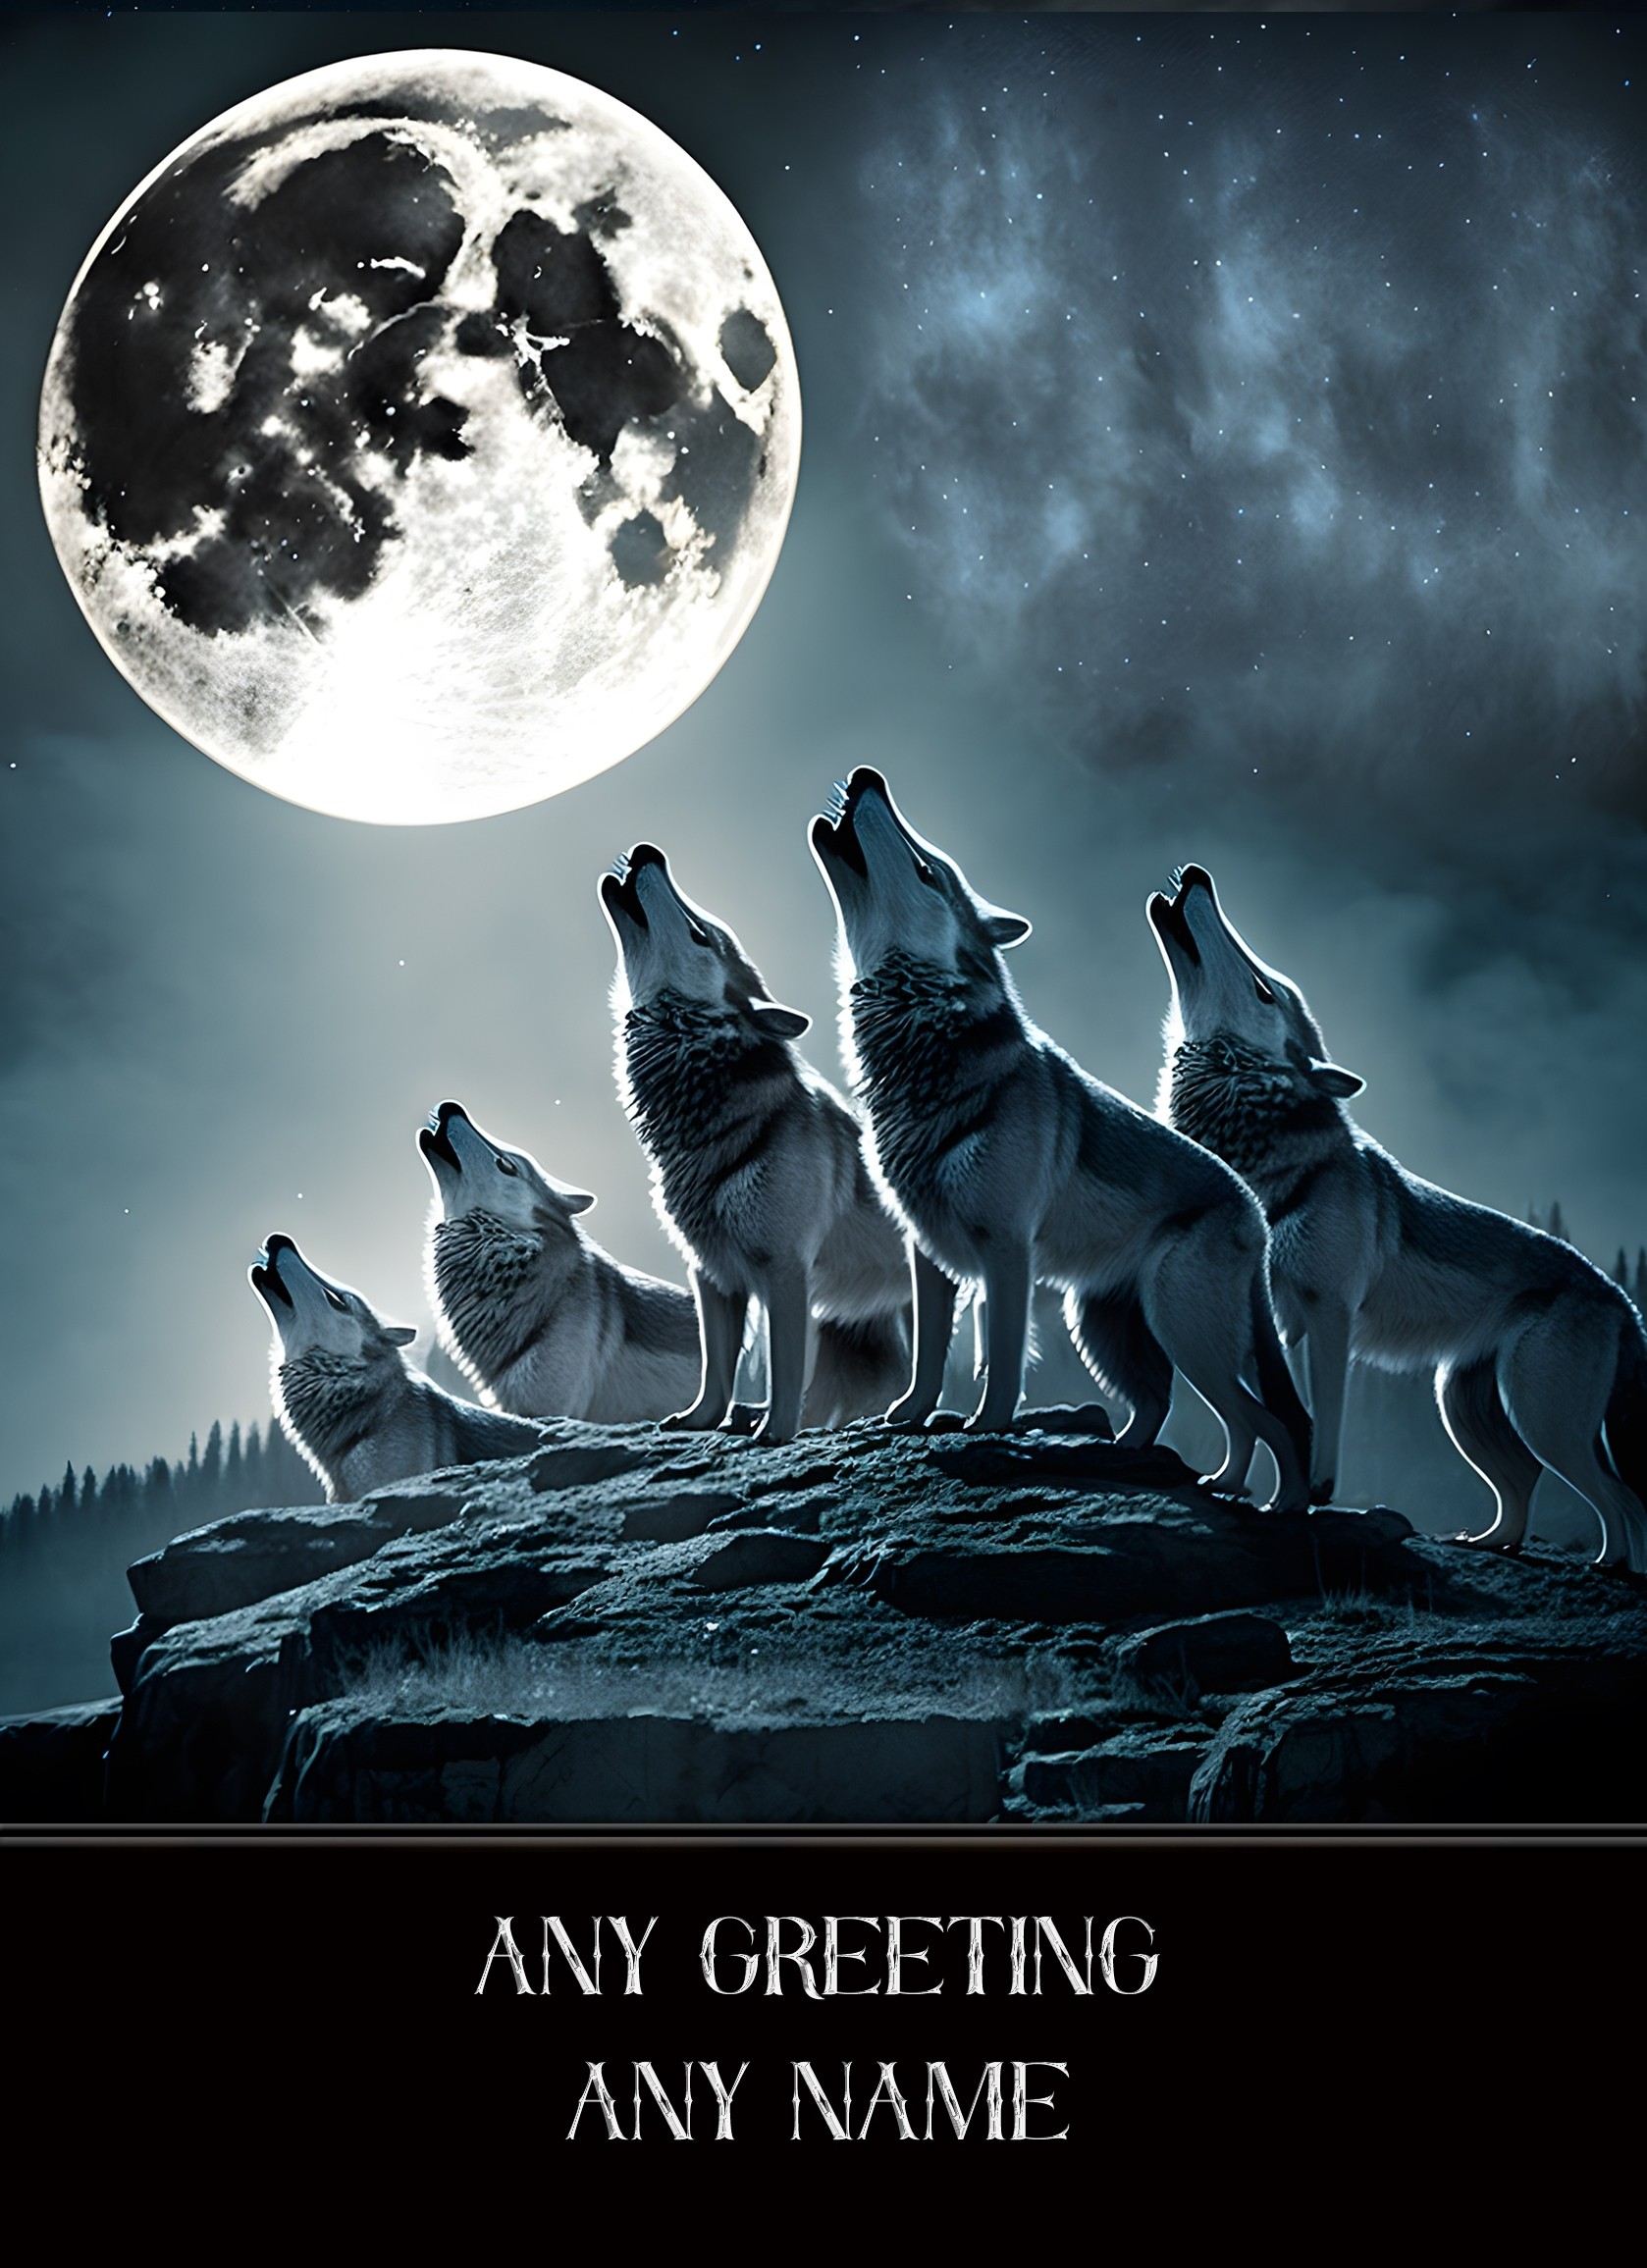 Personalised Wolf Howling Art Fantasy Greeting Card (Birthday, Fathers Day, Any Occasion)